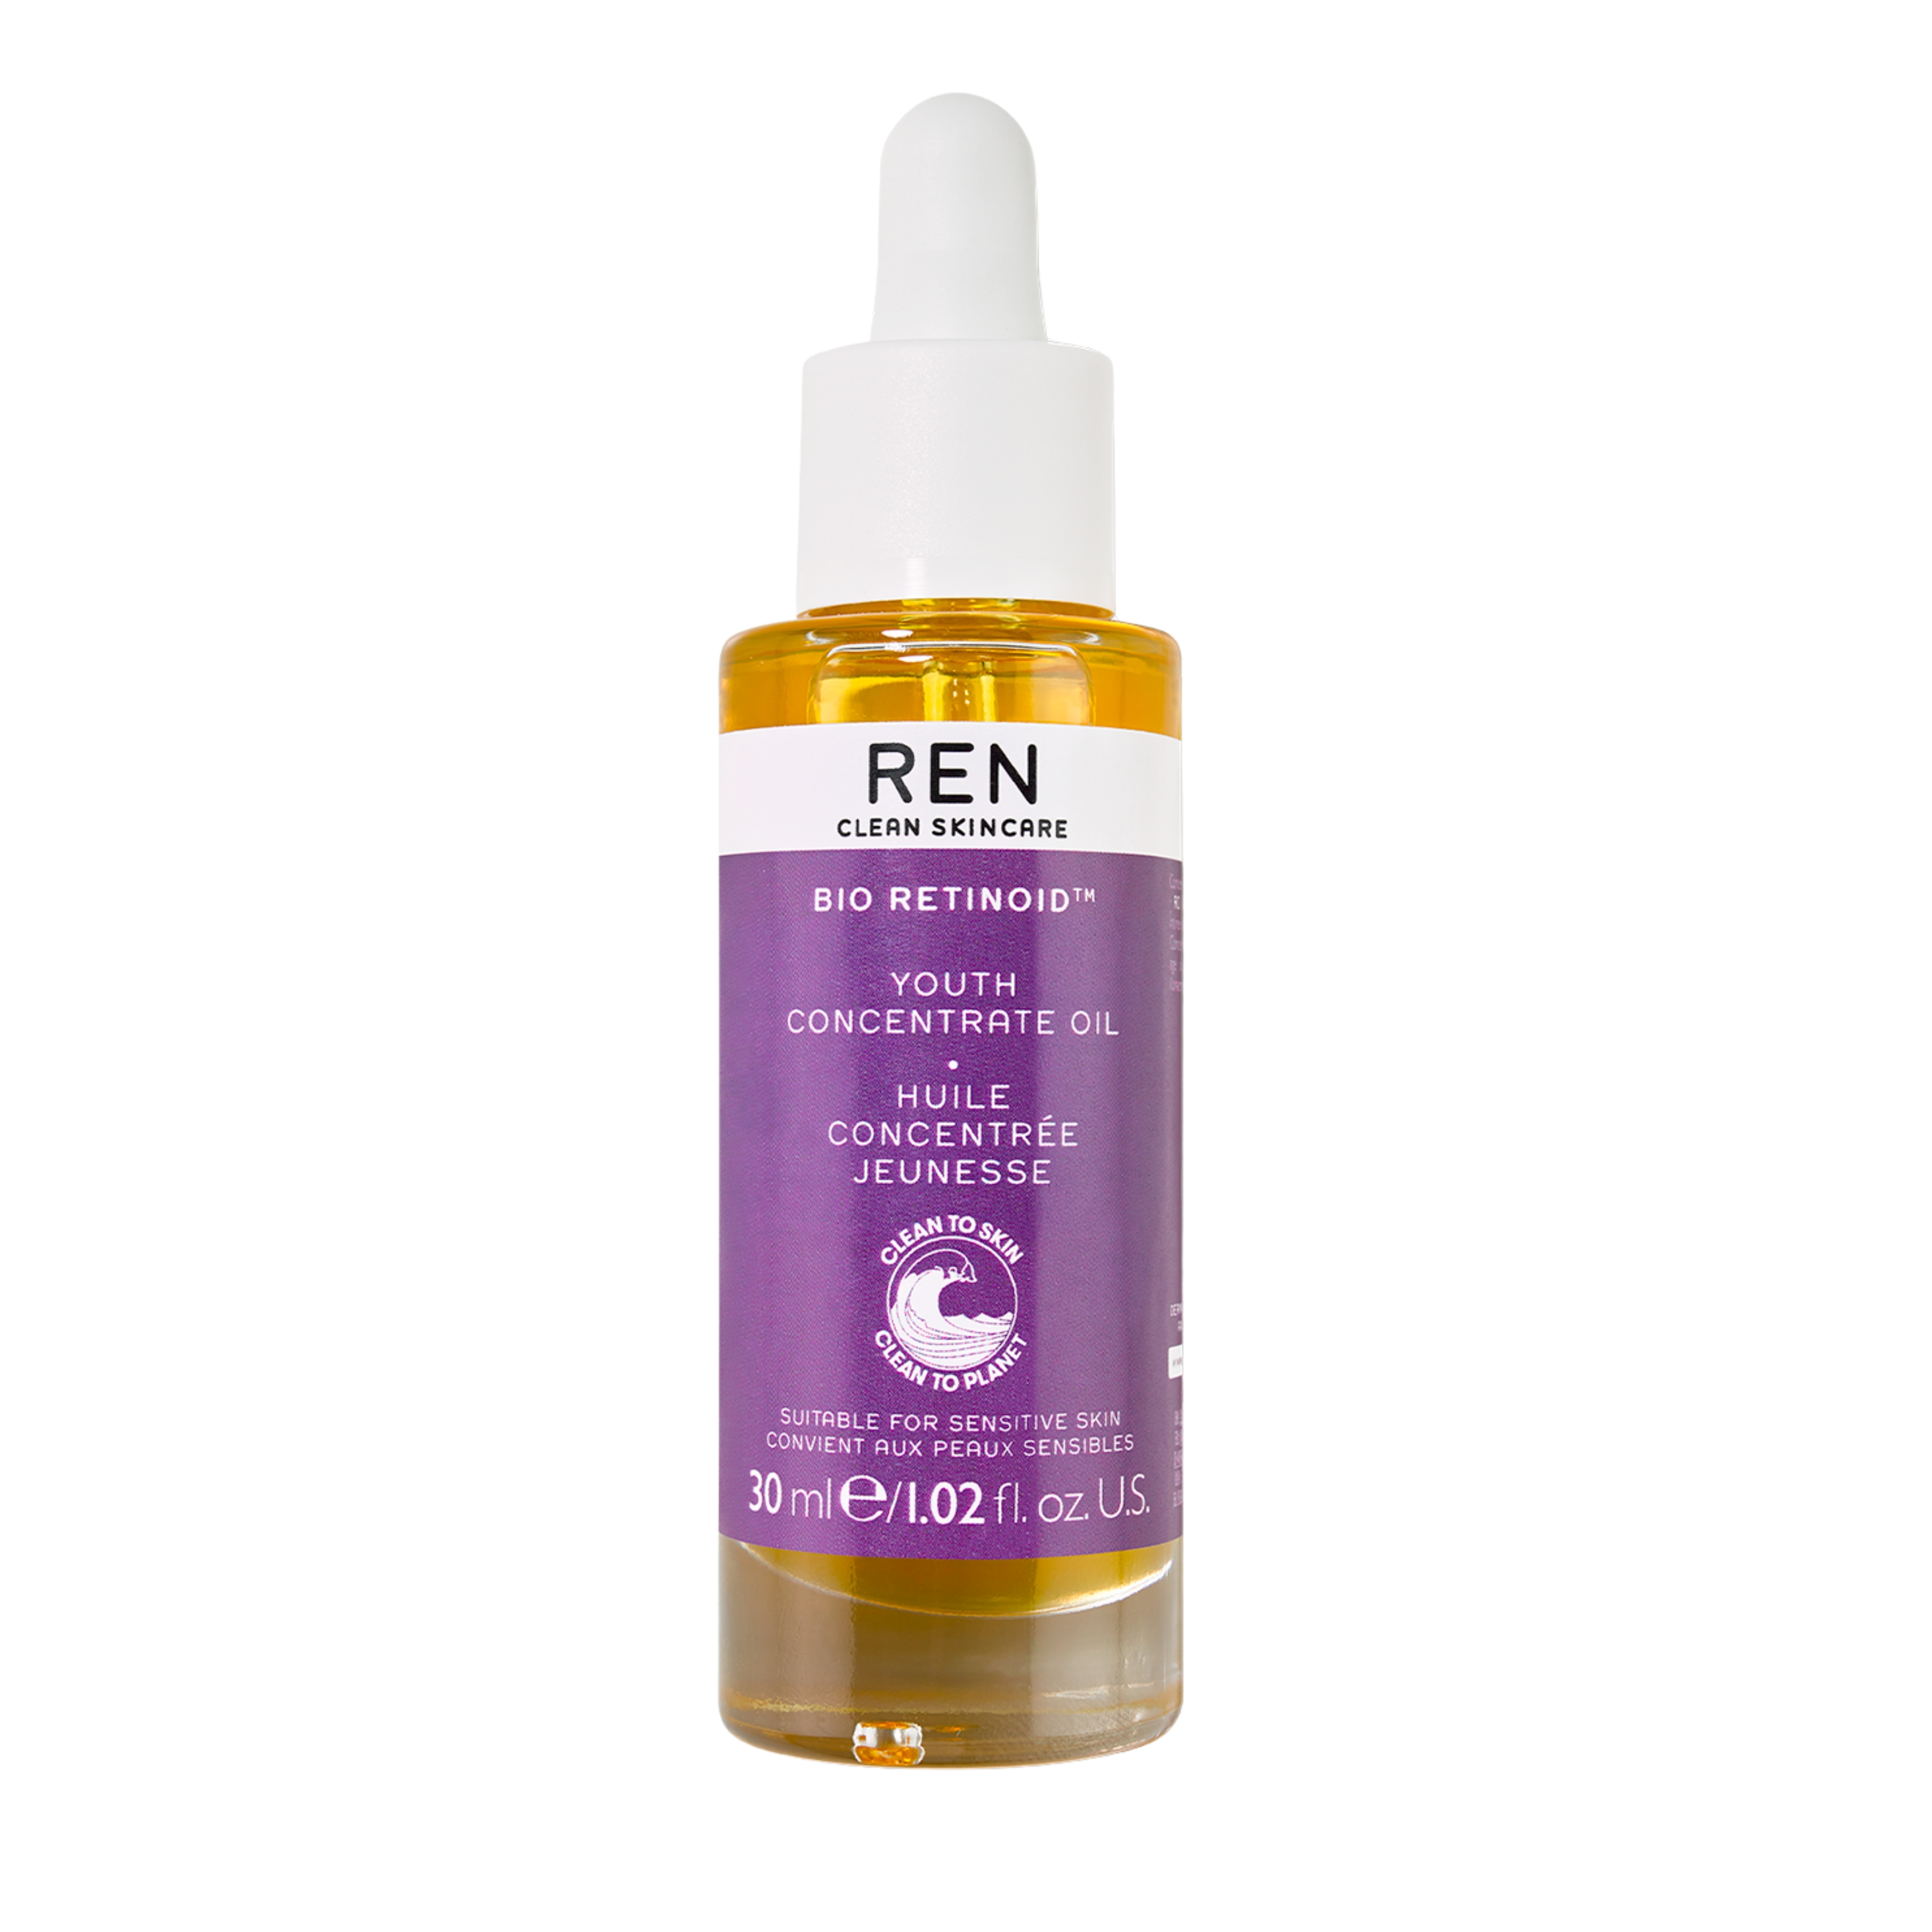  Bio Retinoid Youth Concentrate Oil